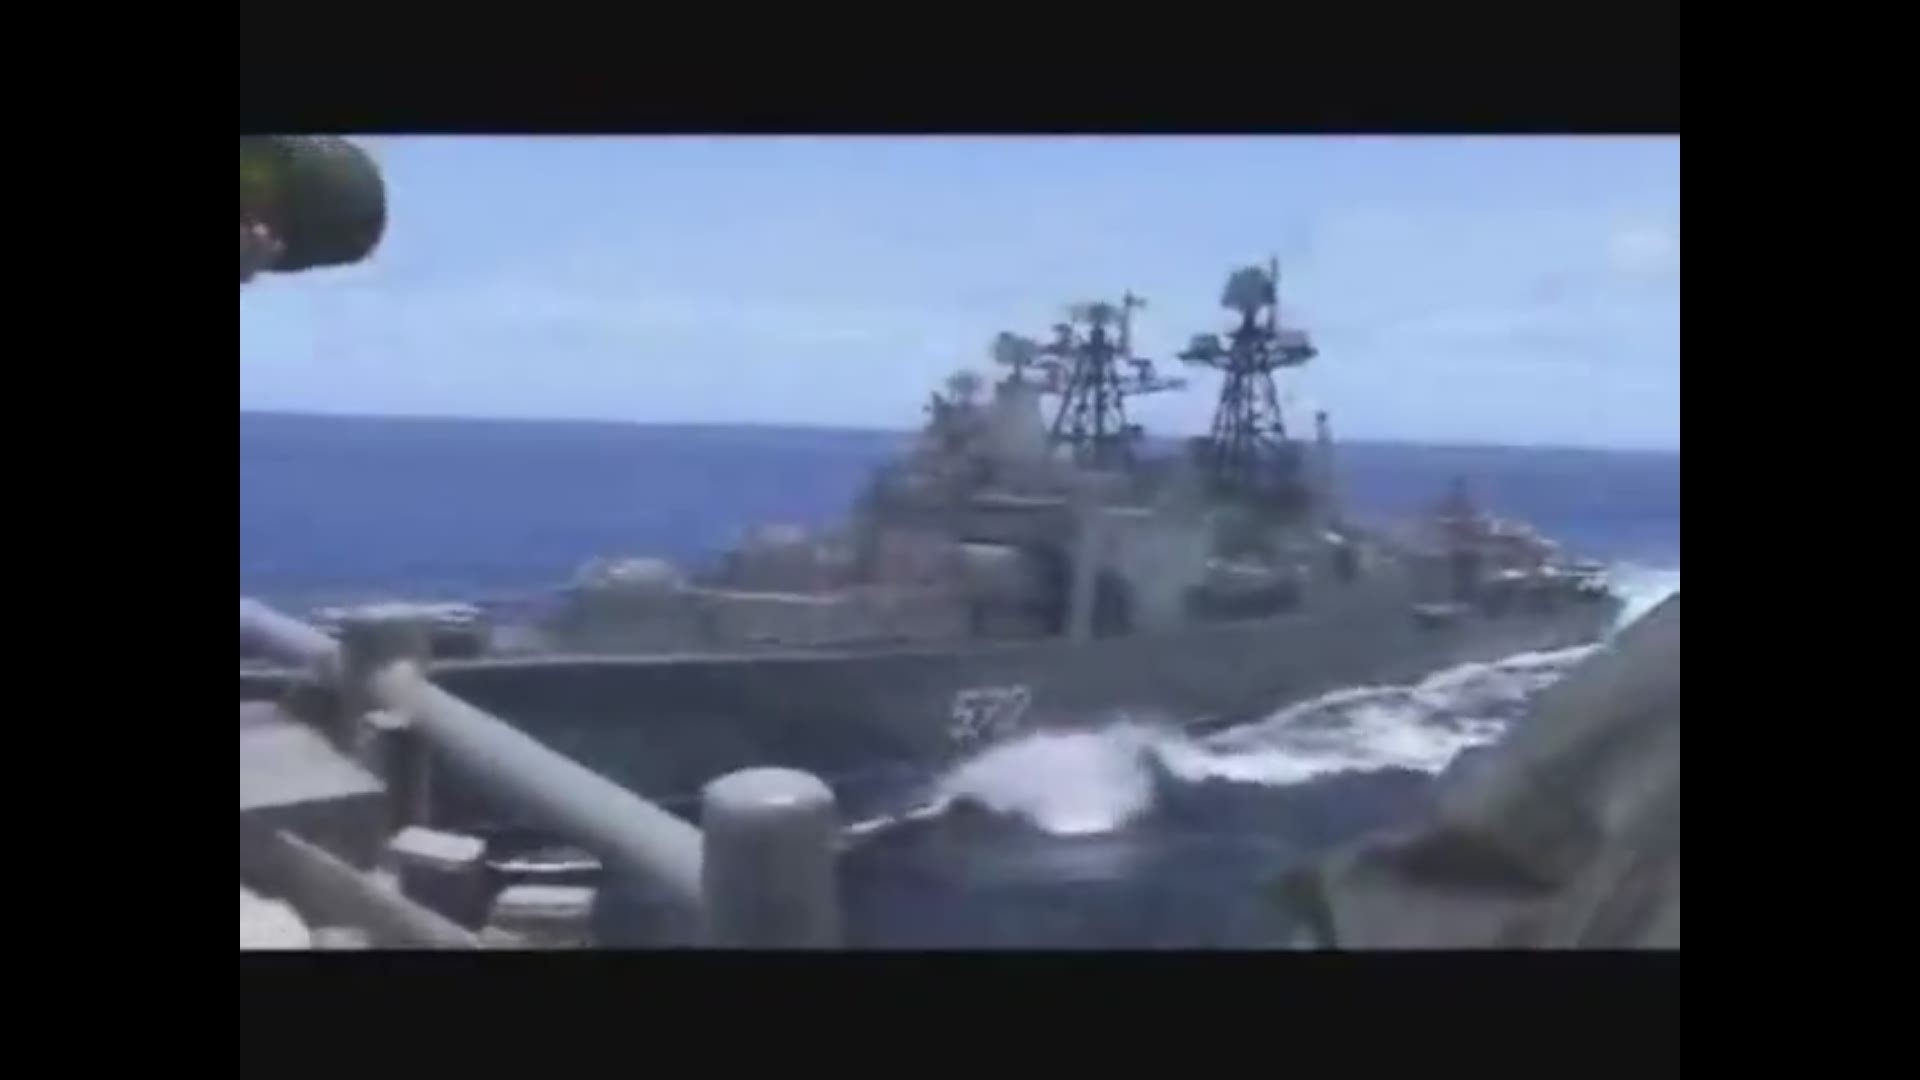 The United States Navy has released video of the guided-missile cruiser USS Chancellorsville being forced to maneuver to avoid collision, after Russian destroyer Udaloy I made an unsafe and unprofessional approach in the Philippine Sea.